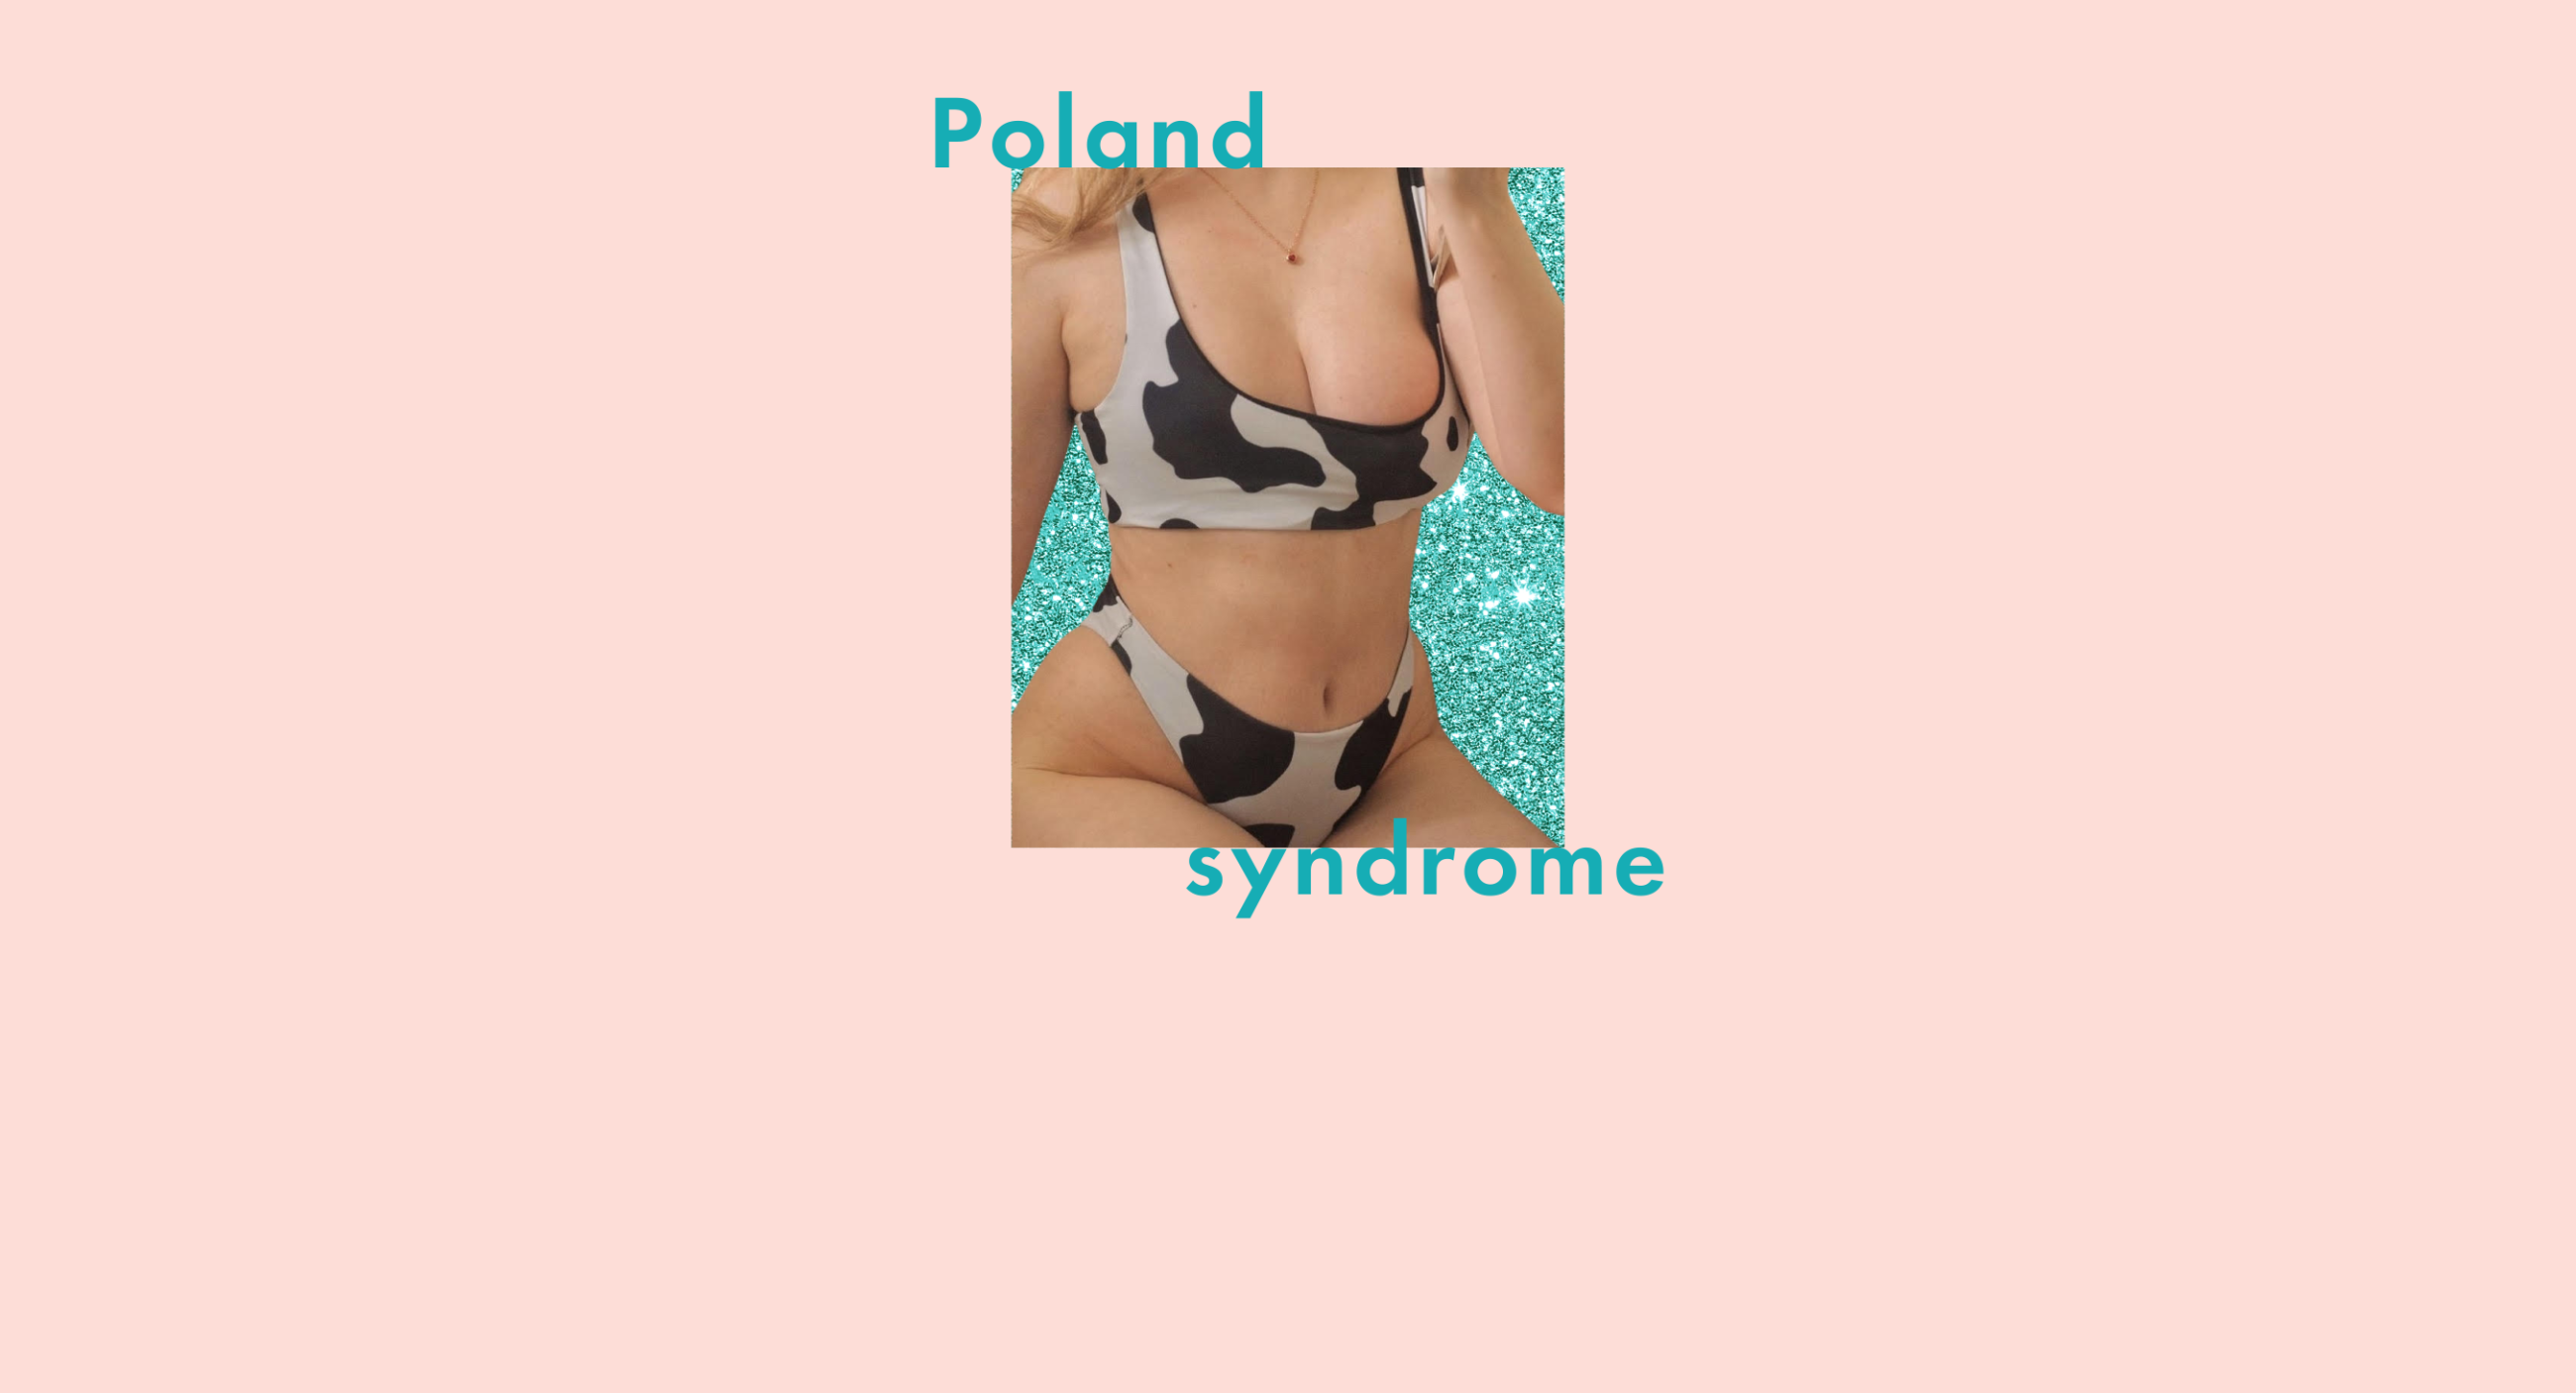 Poland Syndrome What its like to be a woman born with one boob